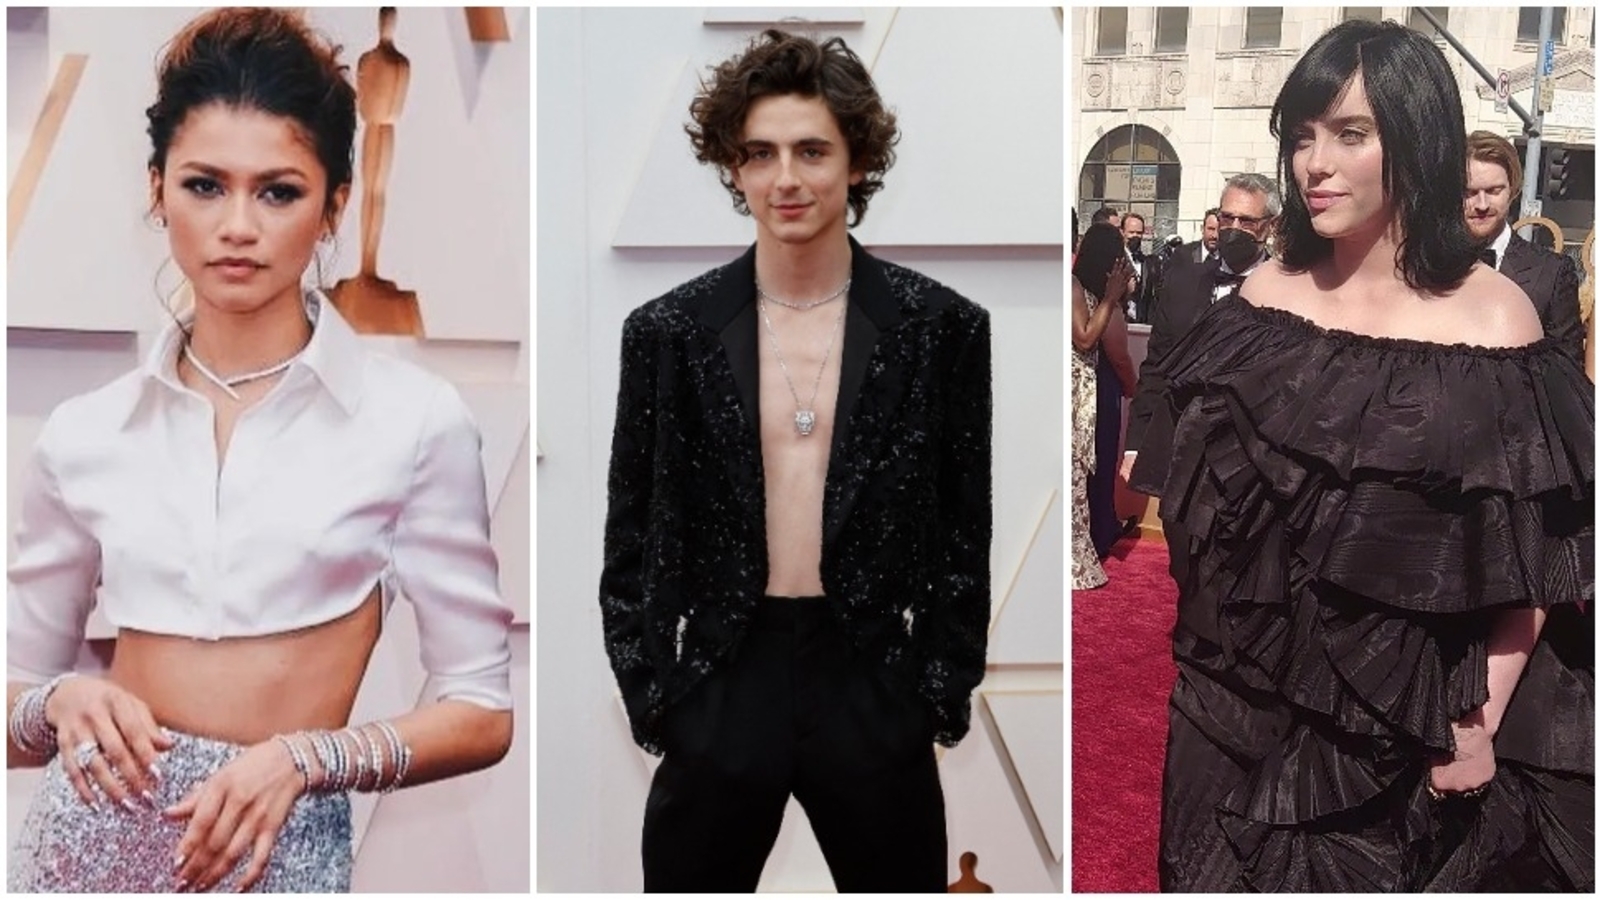 Oscars 2022: Zendaya, Timothee Chalamet, Nicole Kidman, Ariana DeBose and  more – Here is a look at fashion hits and misses from the 94th Academy  Awards [VIEW PICS]